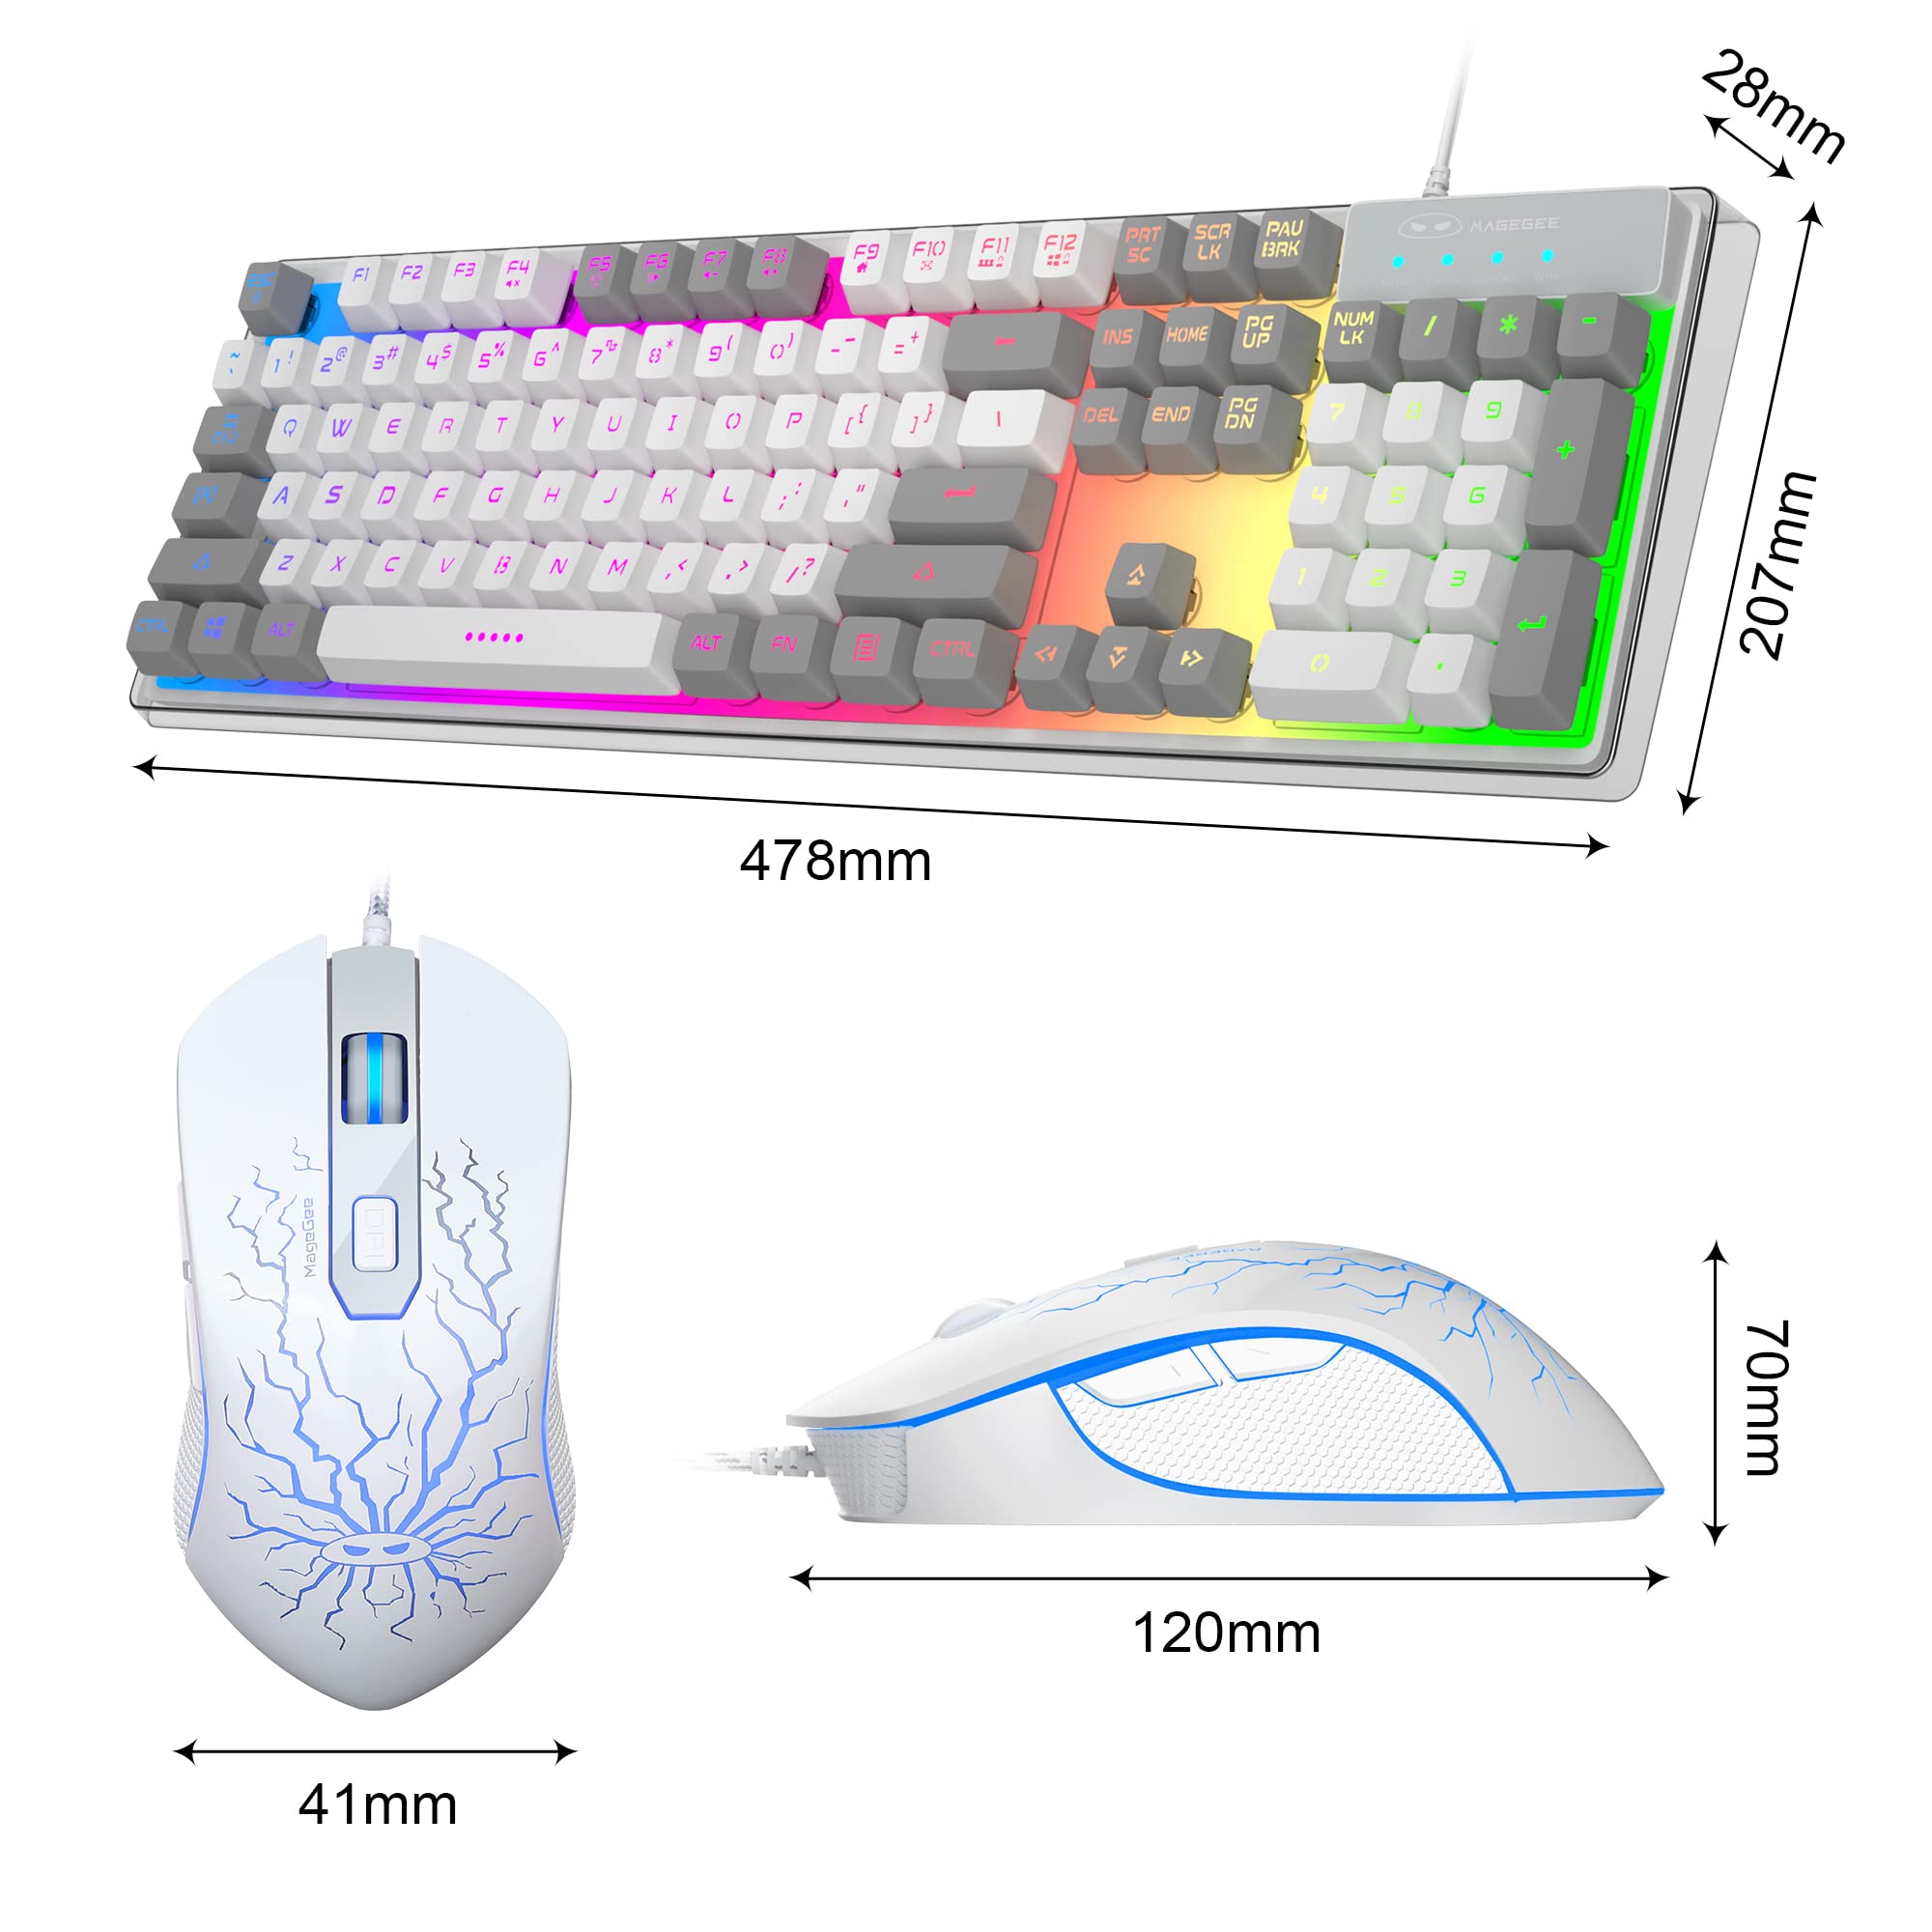 MageGee Gaming Keyboard and Mouse Combo, K1 LED Rainbow Backlit Keyboard with 104 Key Computer PC Gaming Keyboard for PC/Laptop(Gray & White)